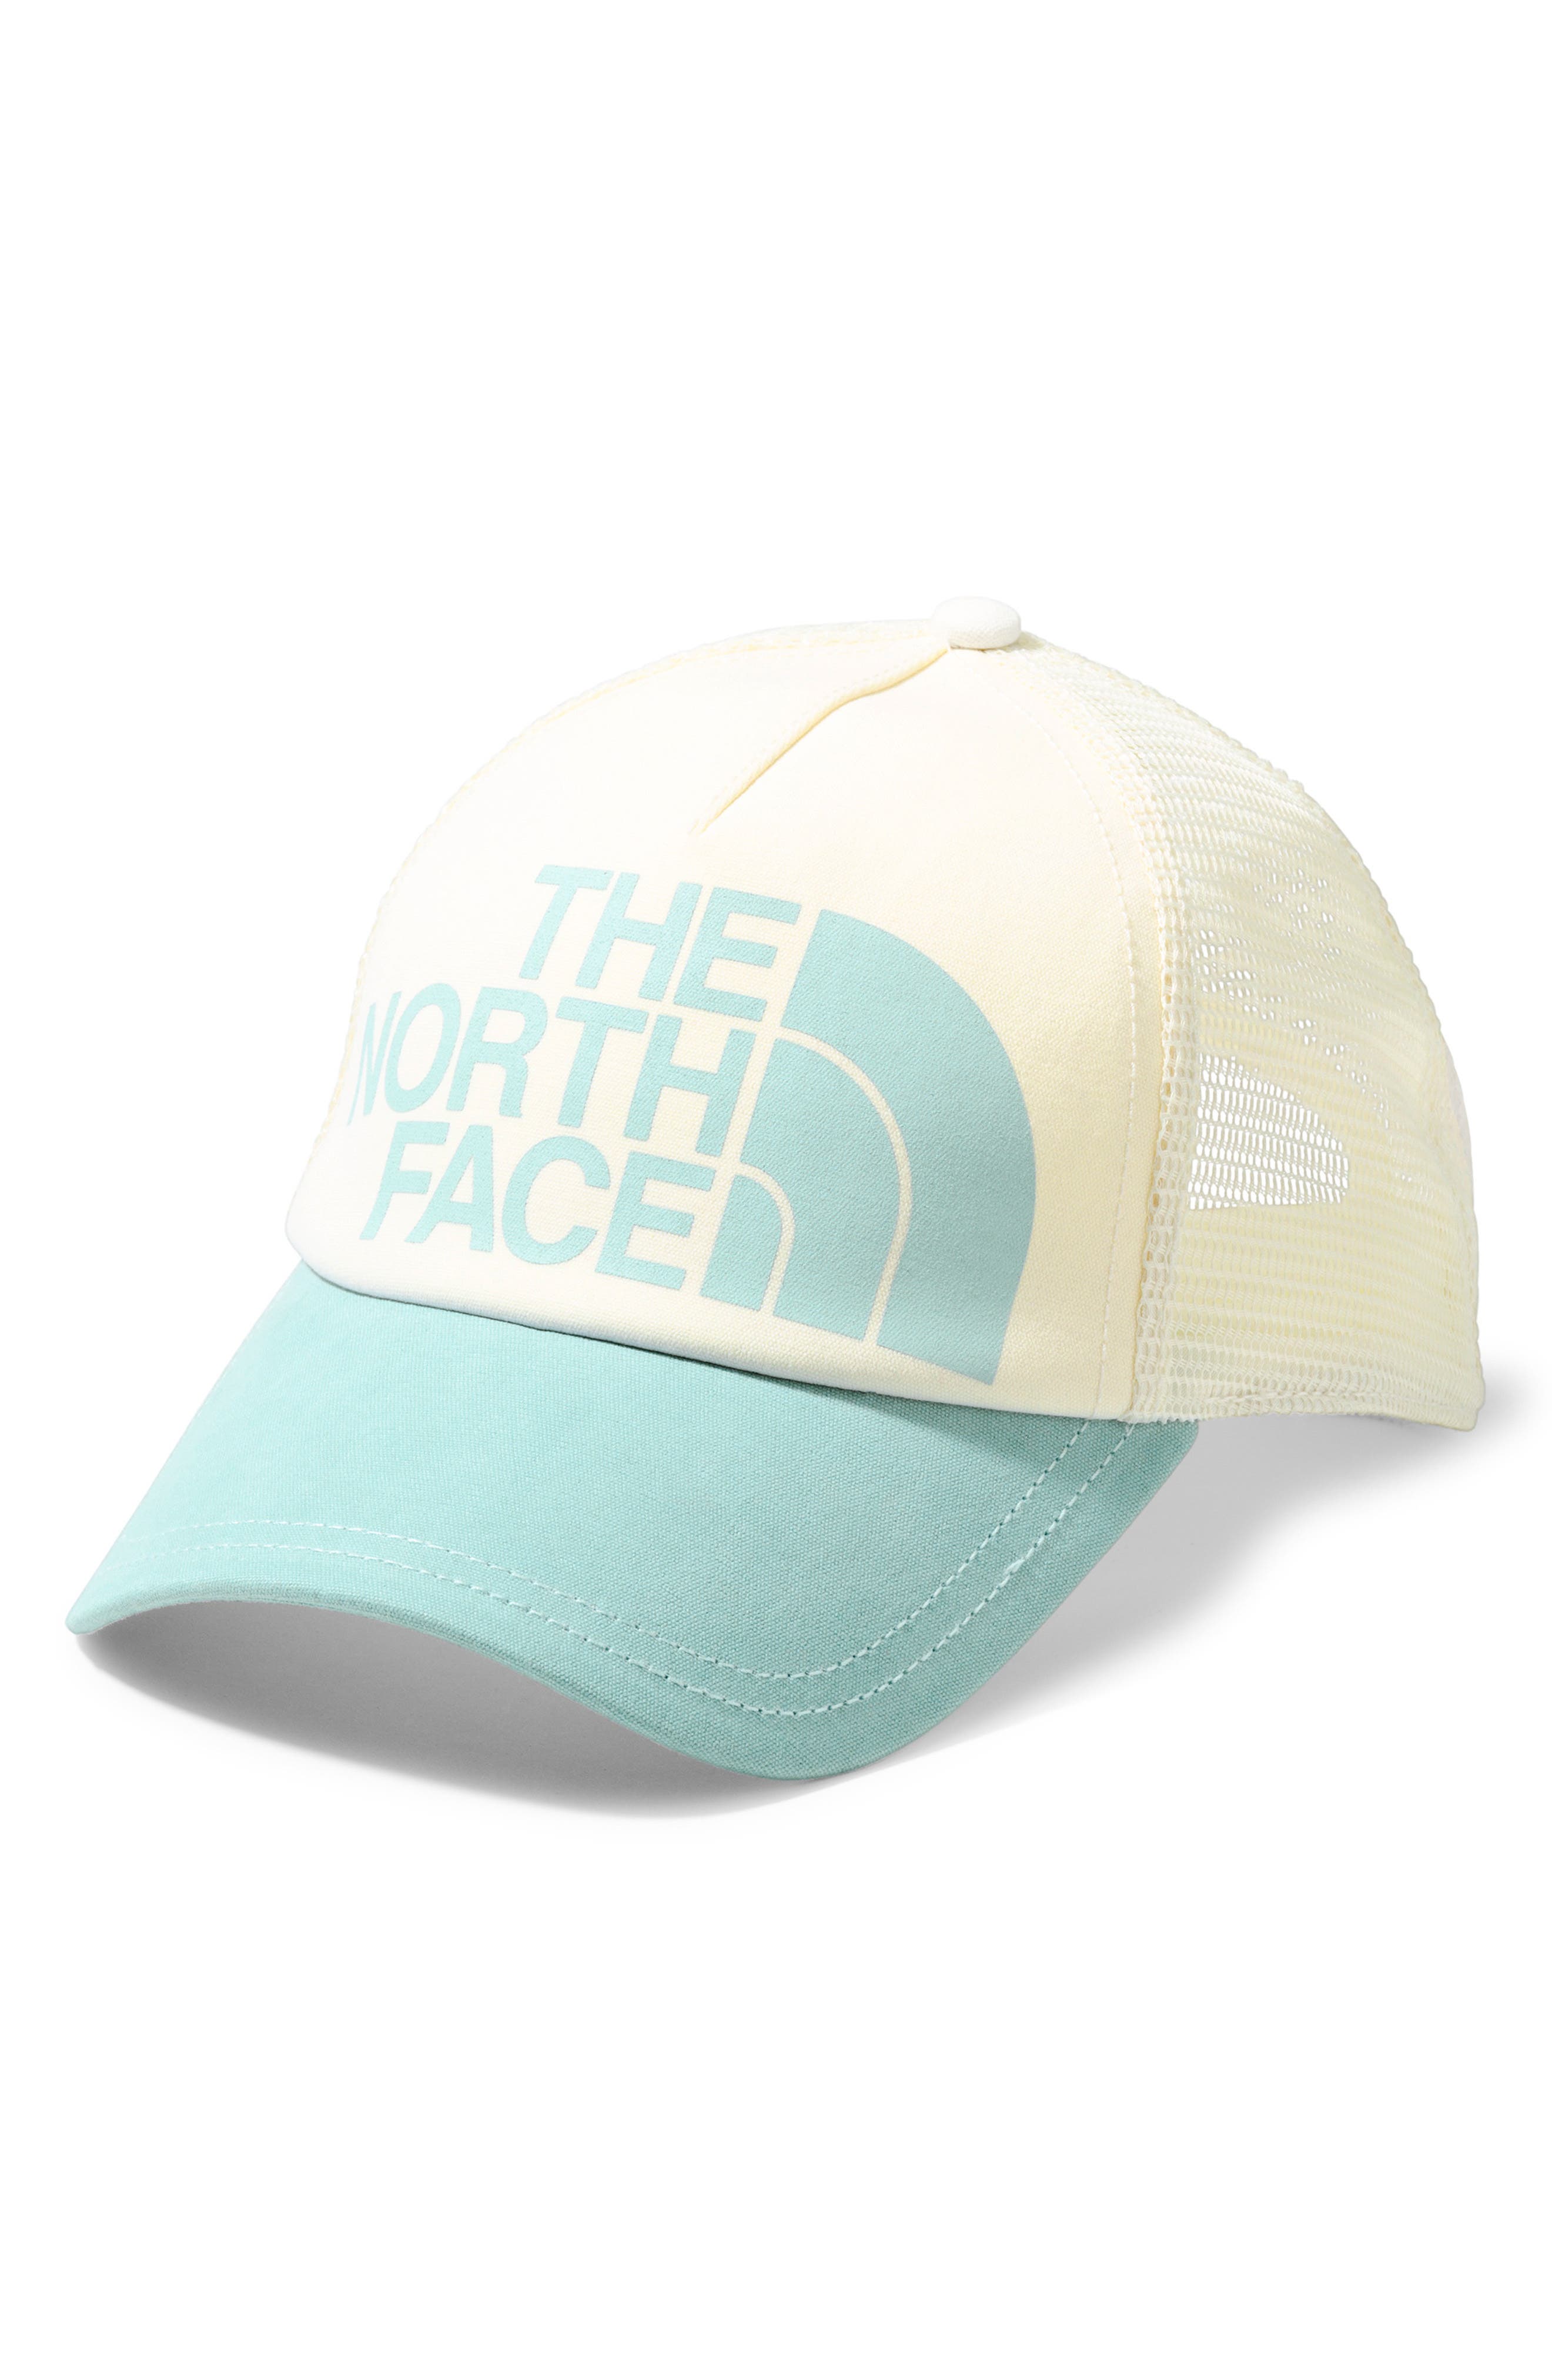 north face low pro trucker